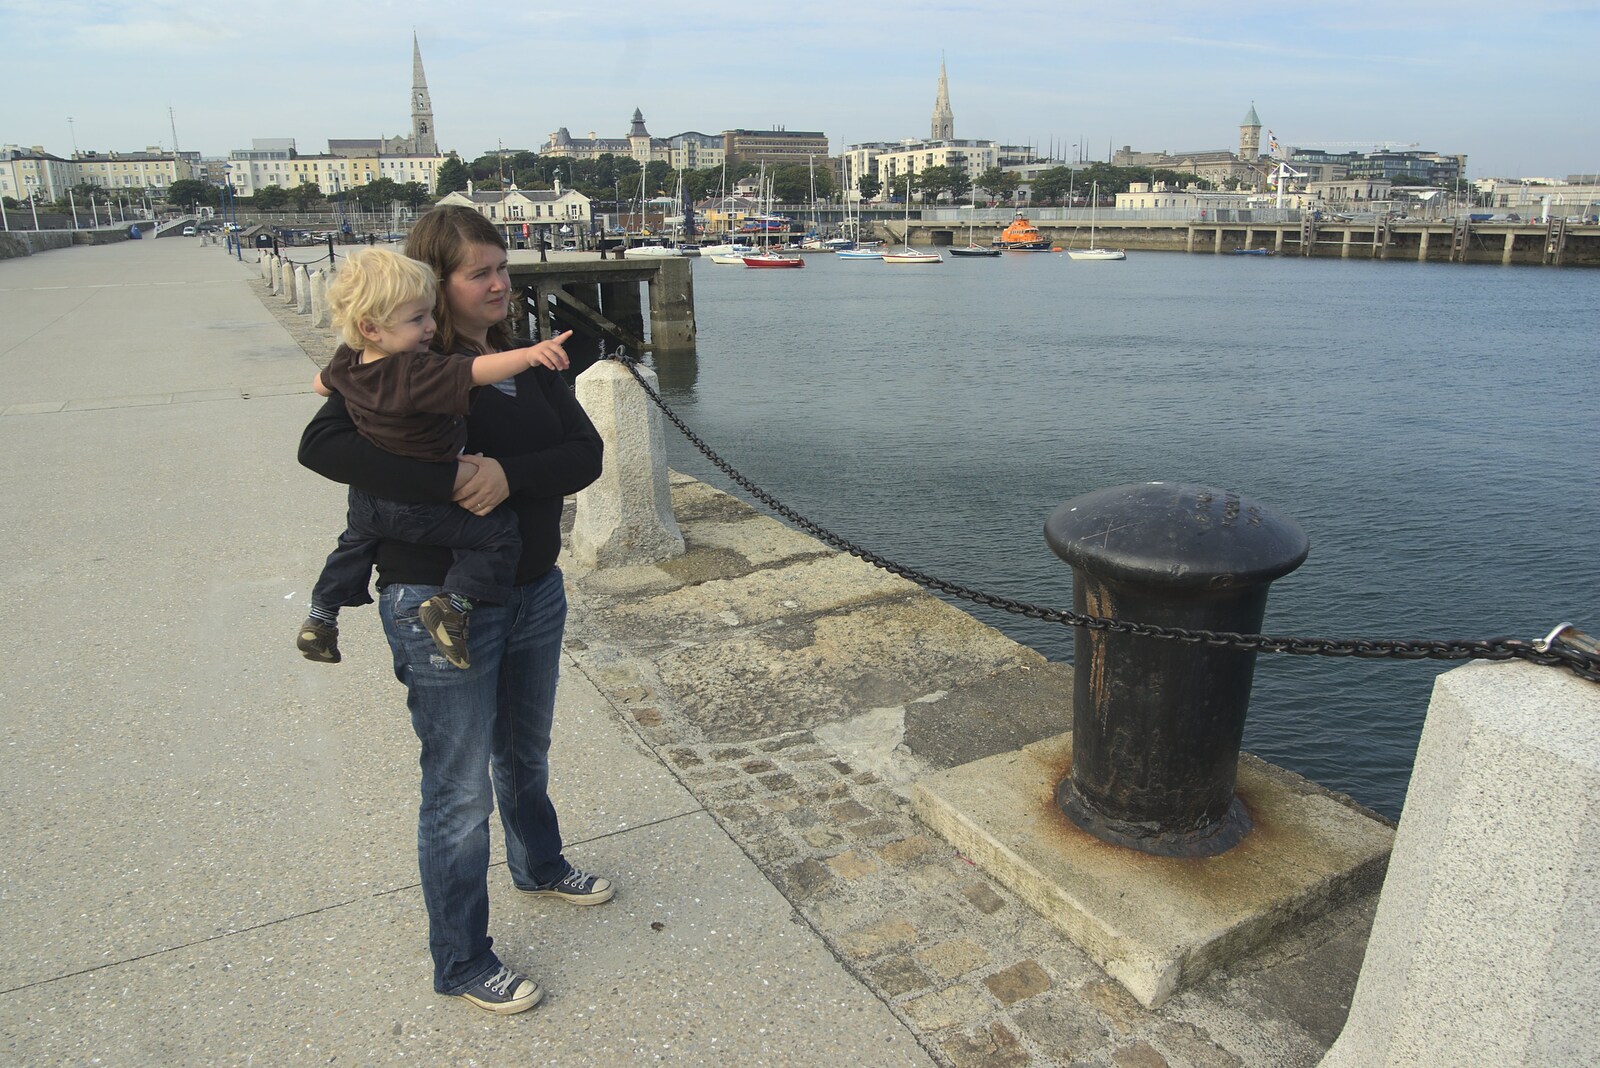 A Day in Dun Laoghaire, County Dublin, Ireland - 3rd September 2010: Fred points out to sea